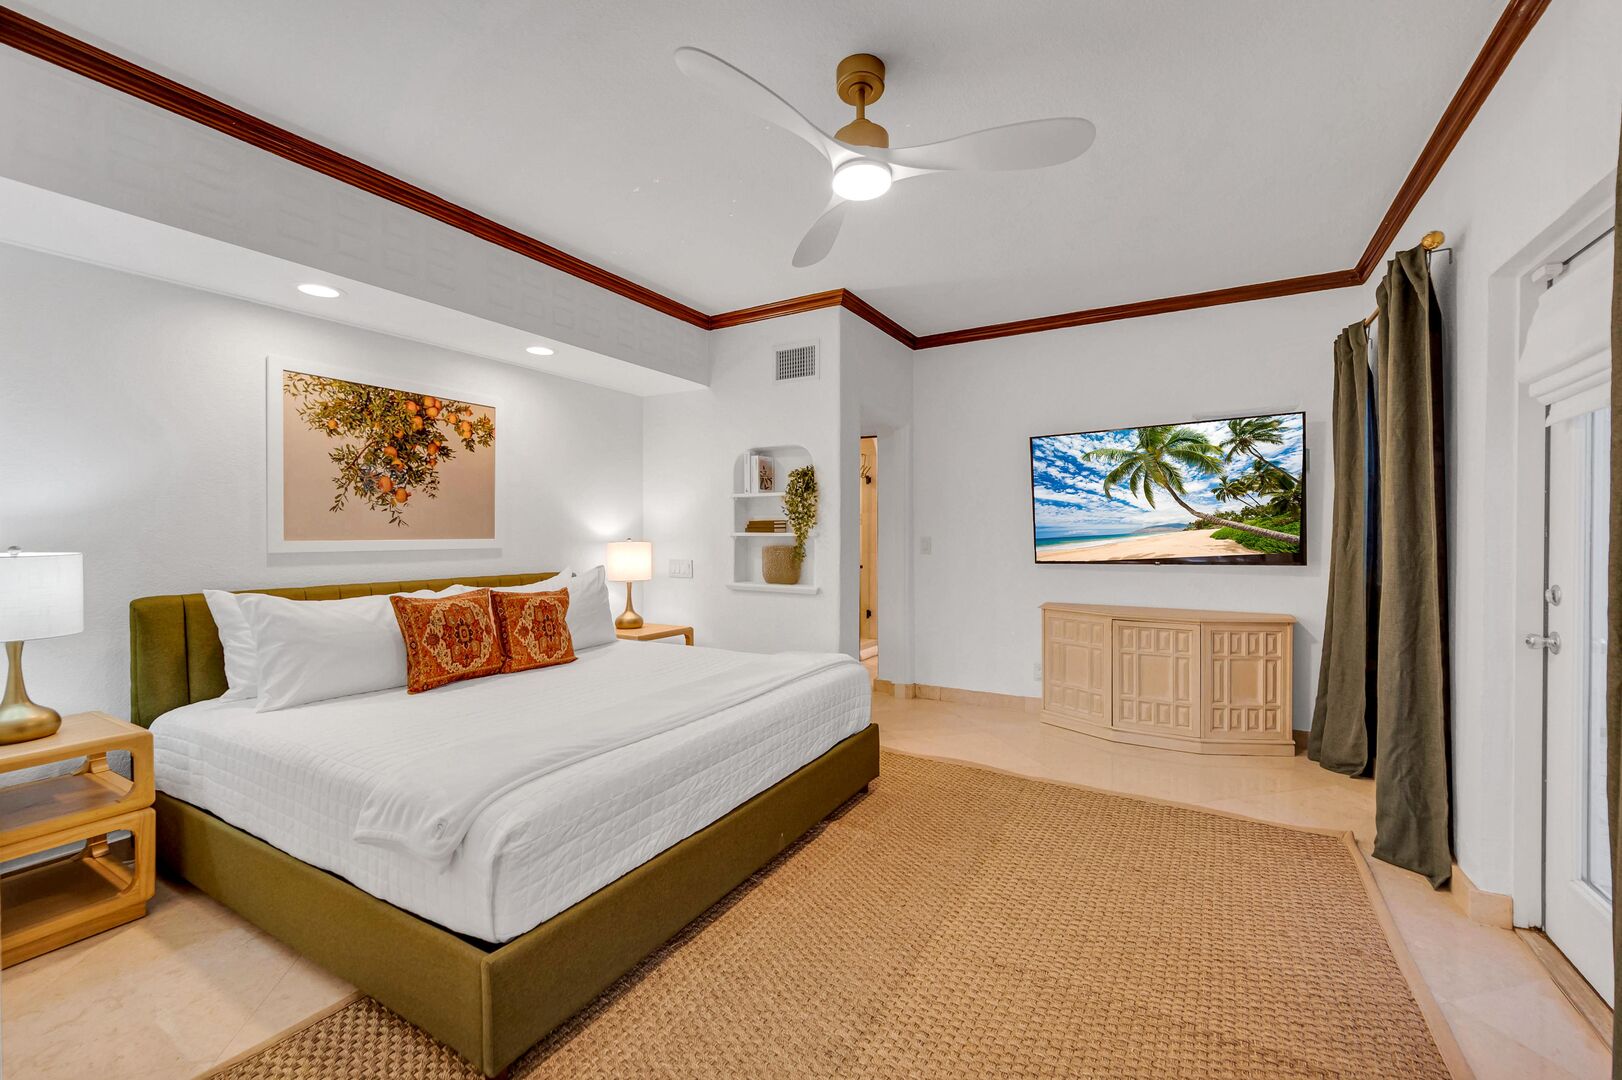 The ample primary bedroom features a king size bed and smart TV.